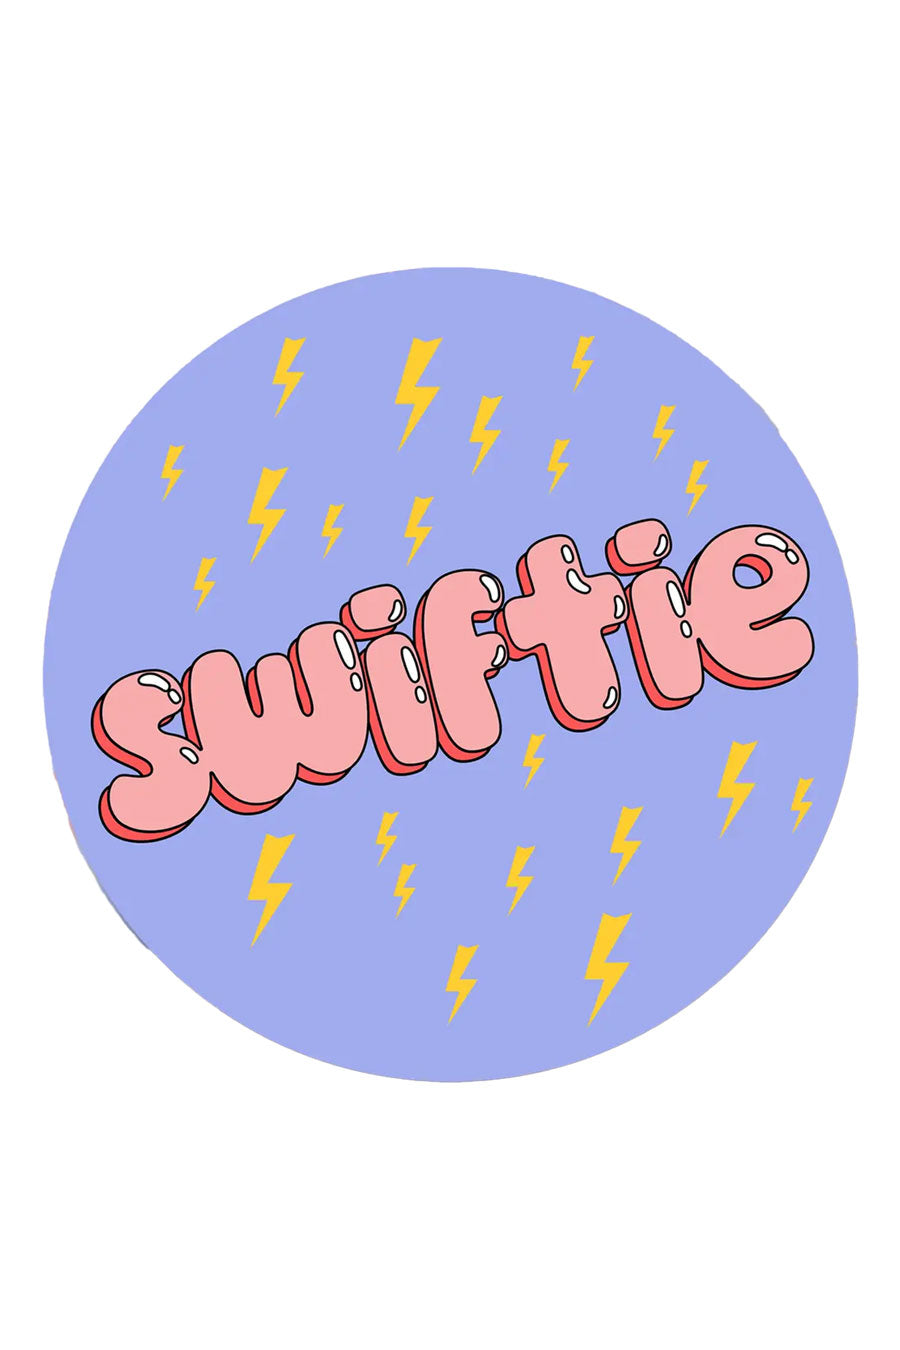 Swiftie Collection Philippines